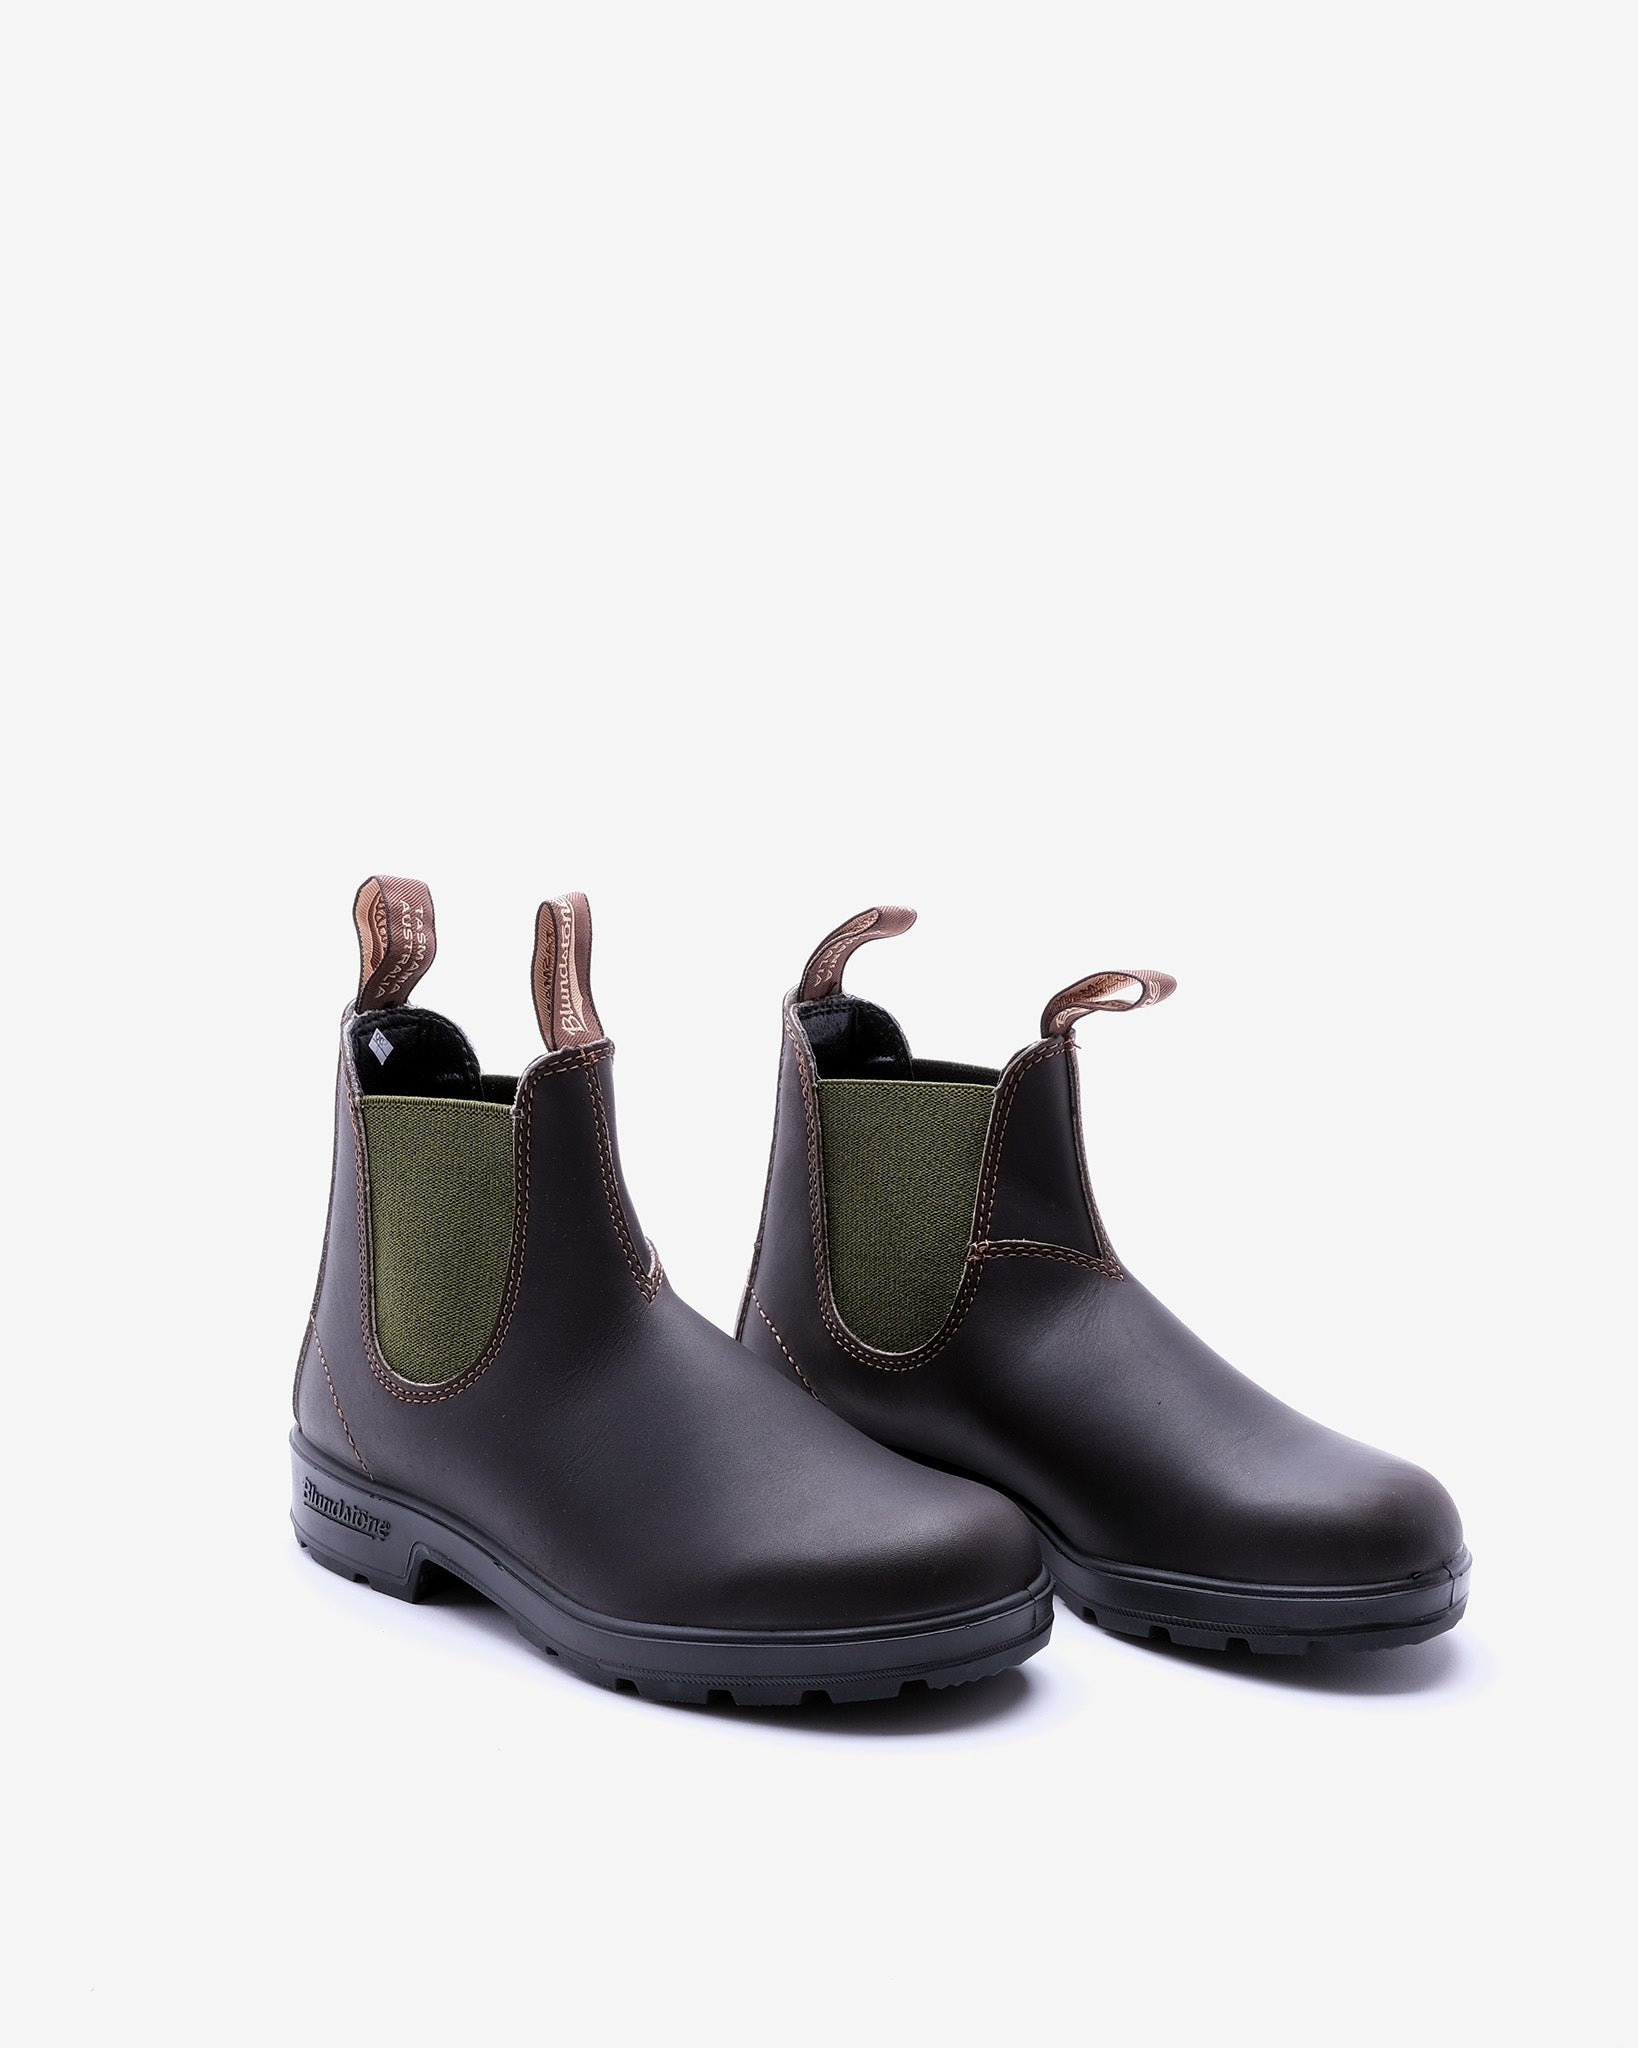 519 Brown/Olive Leather Boots